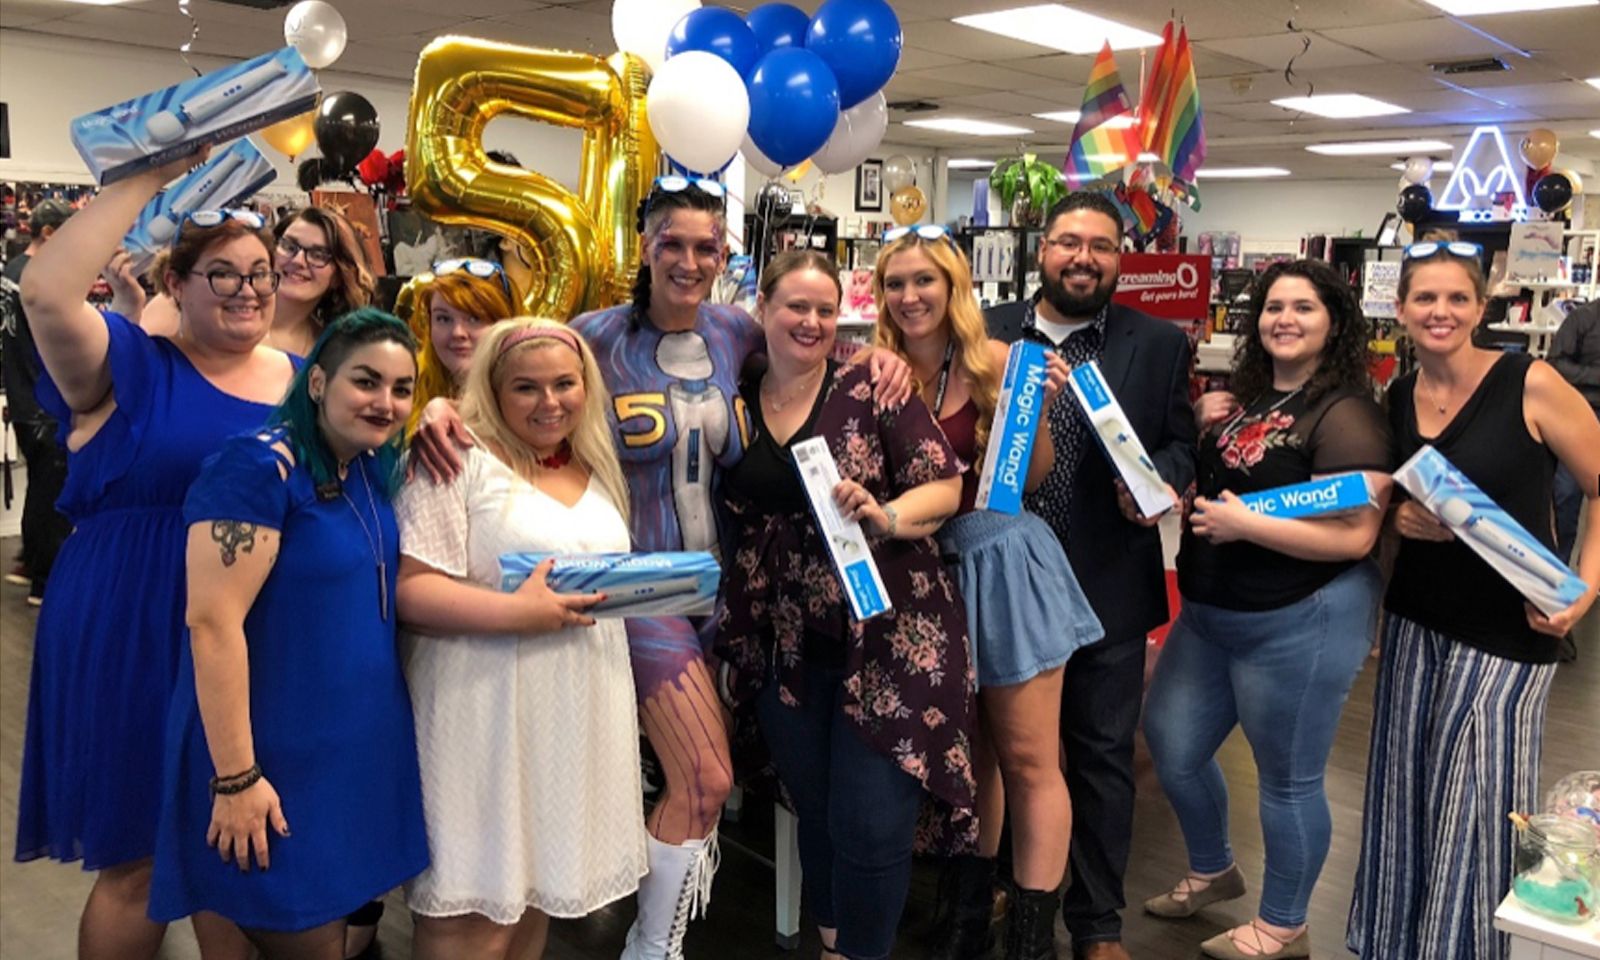 Fairvilla Throws Party to Celebrate Magic Wand’s 50 Years